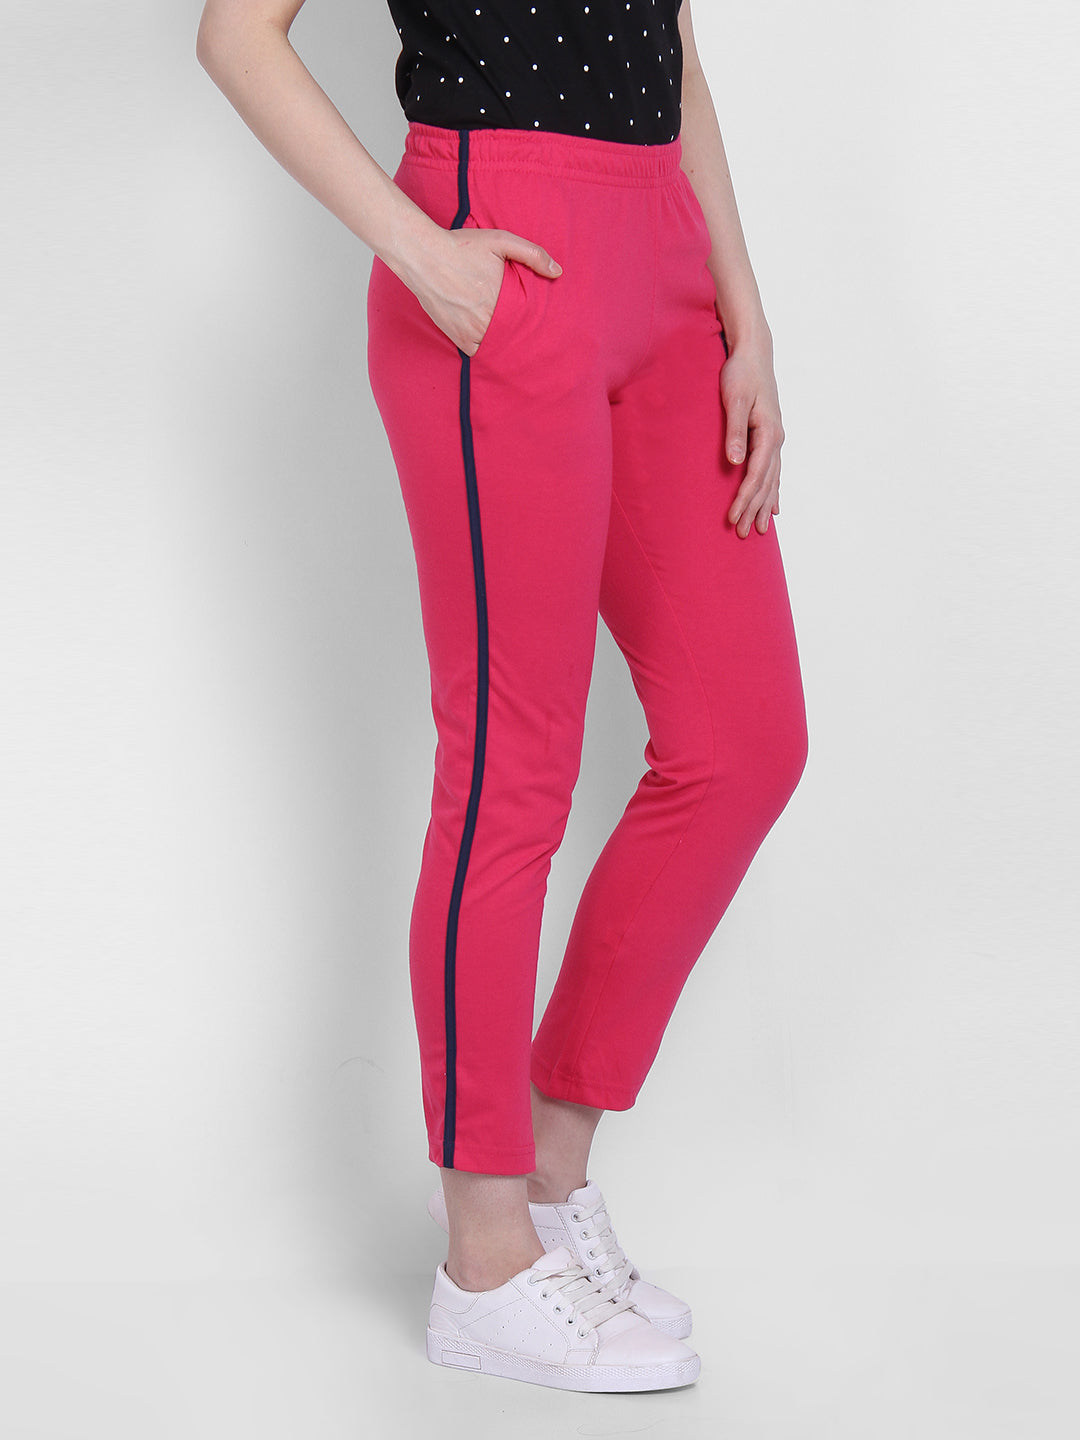 Hot Pink Pants Outfit | High Waist Hot Pink Aesthetic Slit Pants – TGC  FASHION